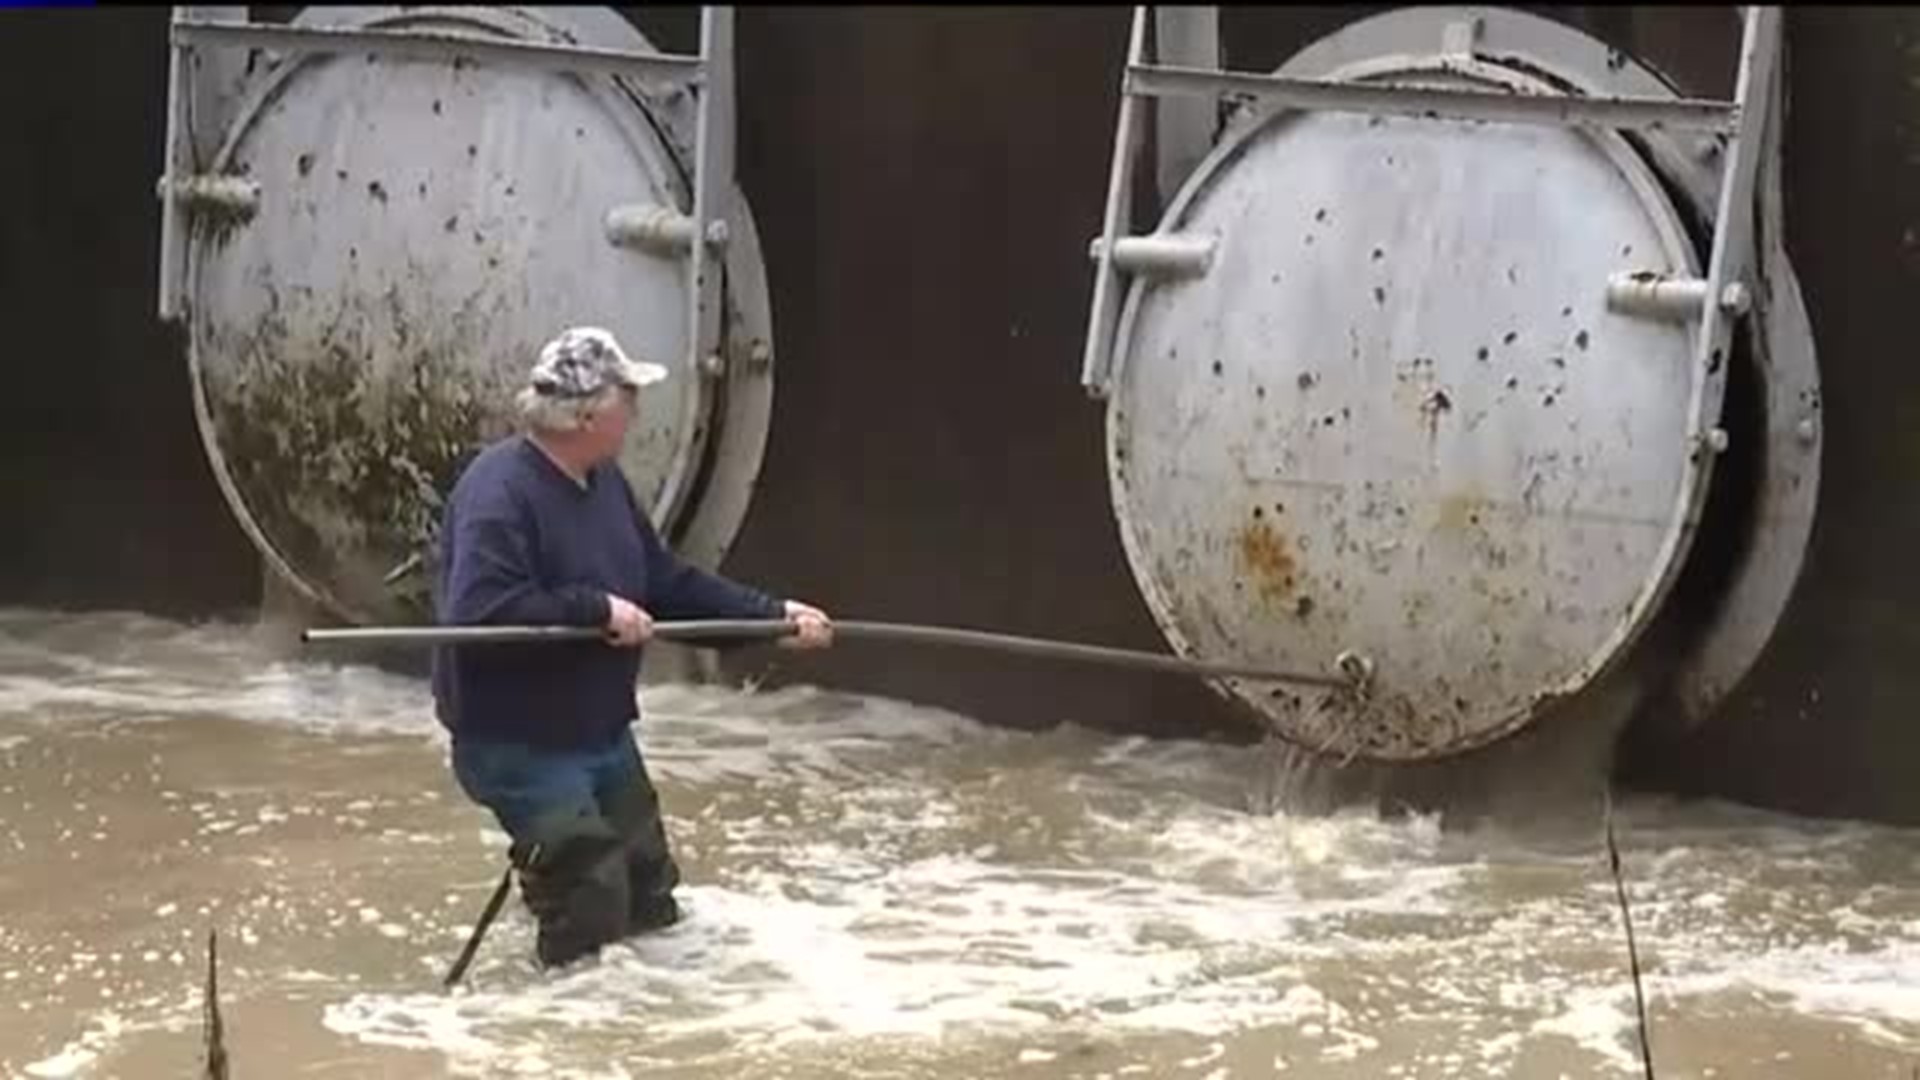 Workers Checking Flood Gates, Drains in Lycoming County